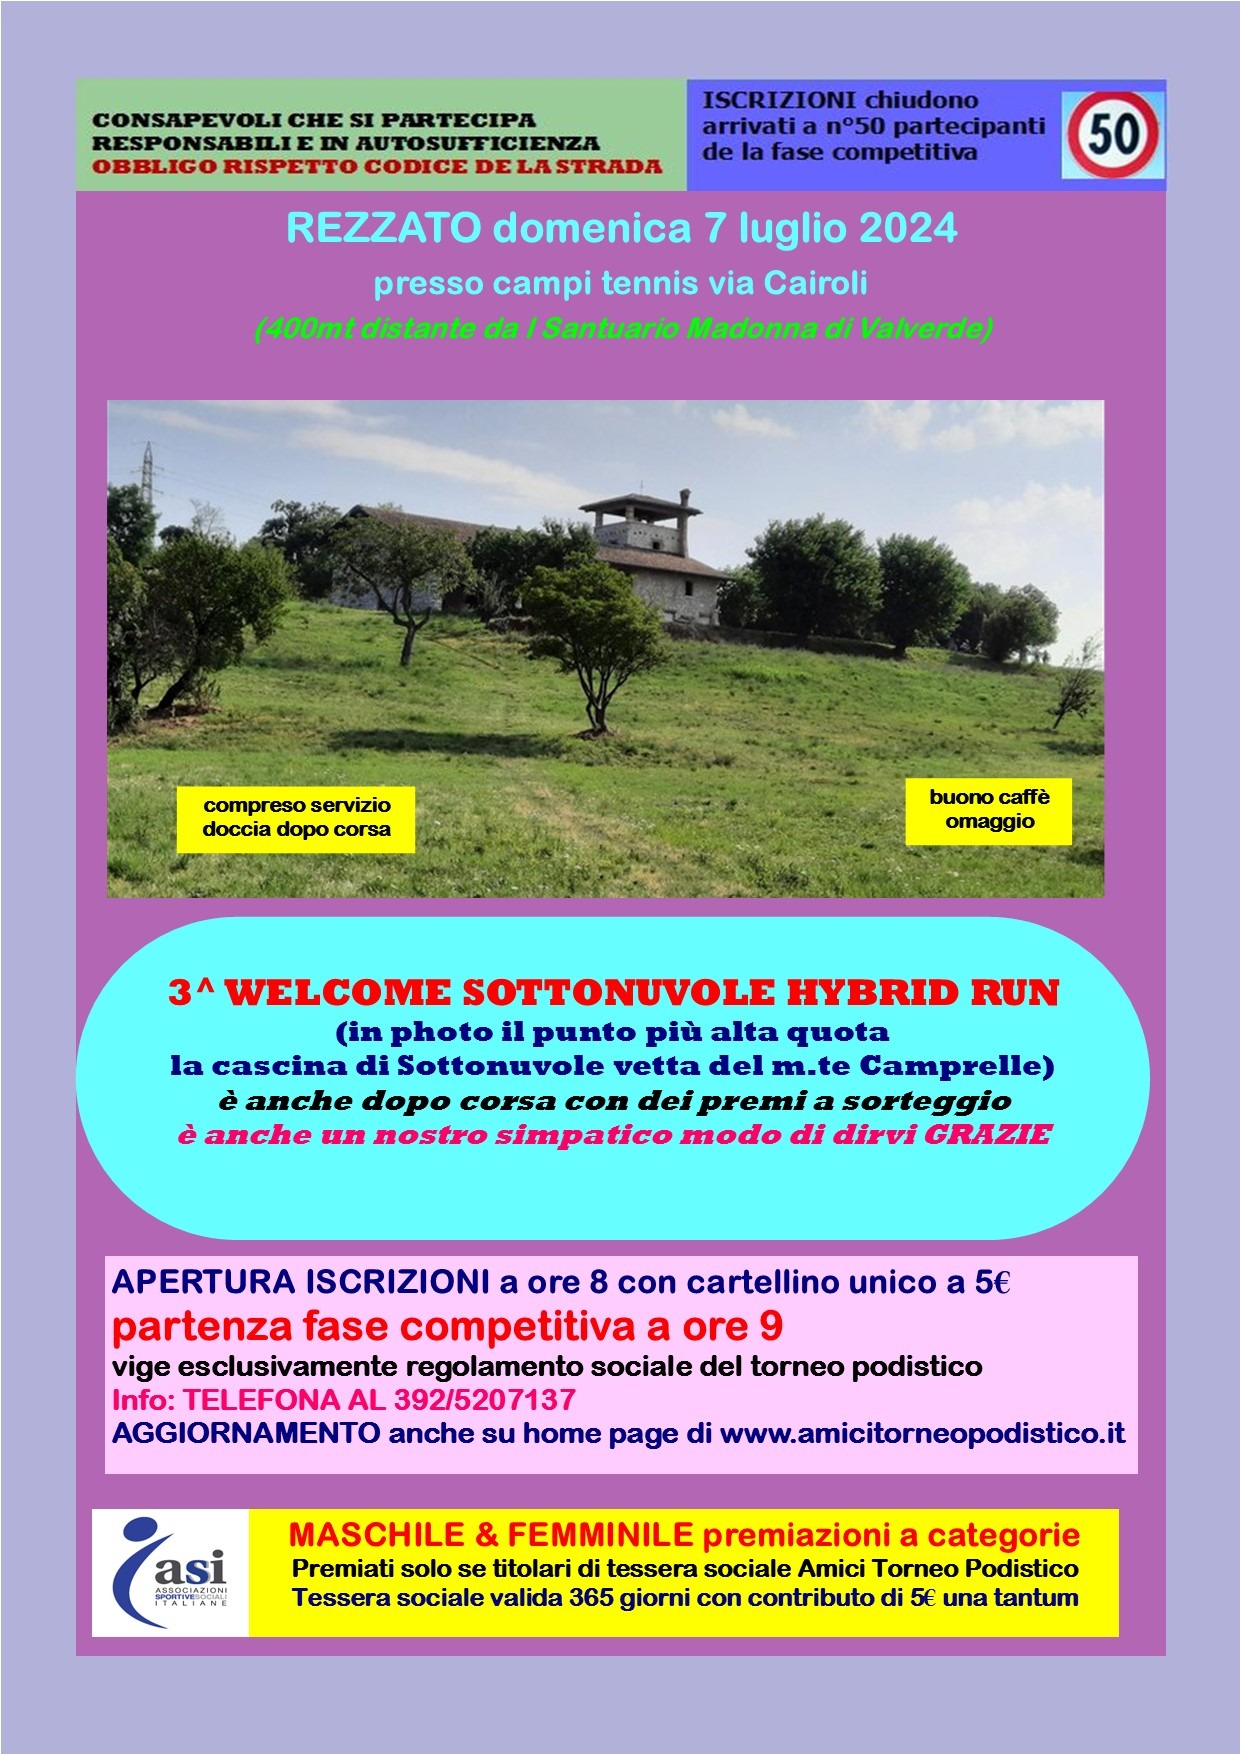 WELCOME SOTTONUVOLE TRAILRUNNING